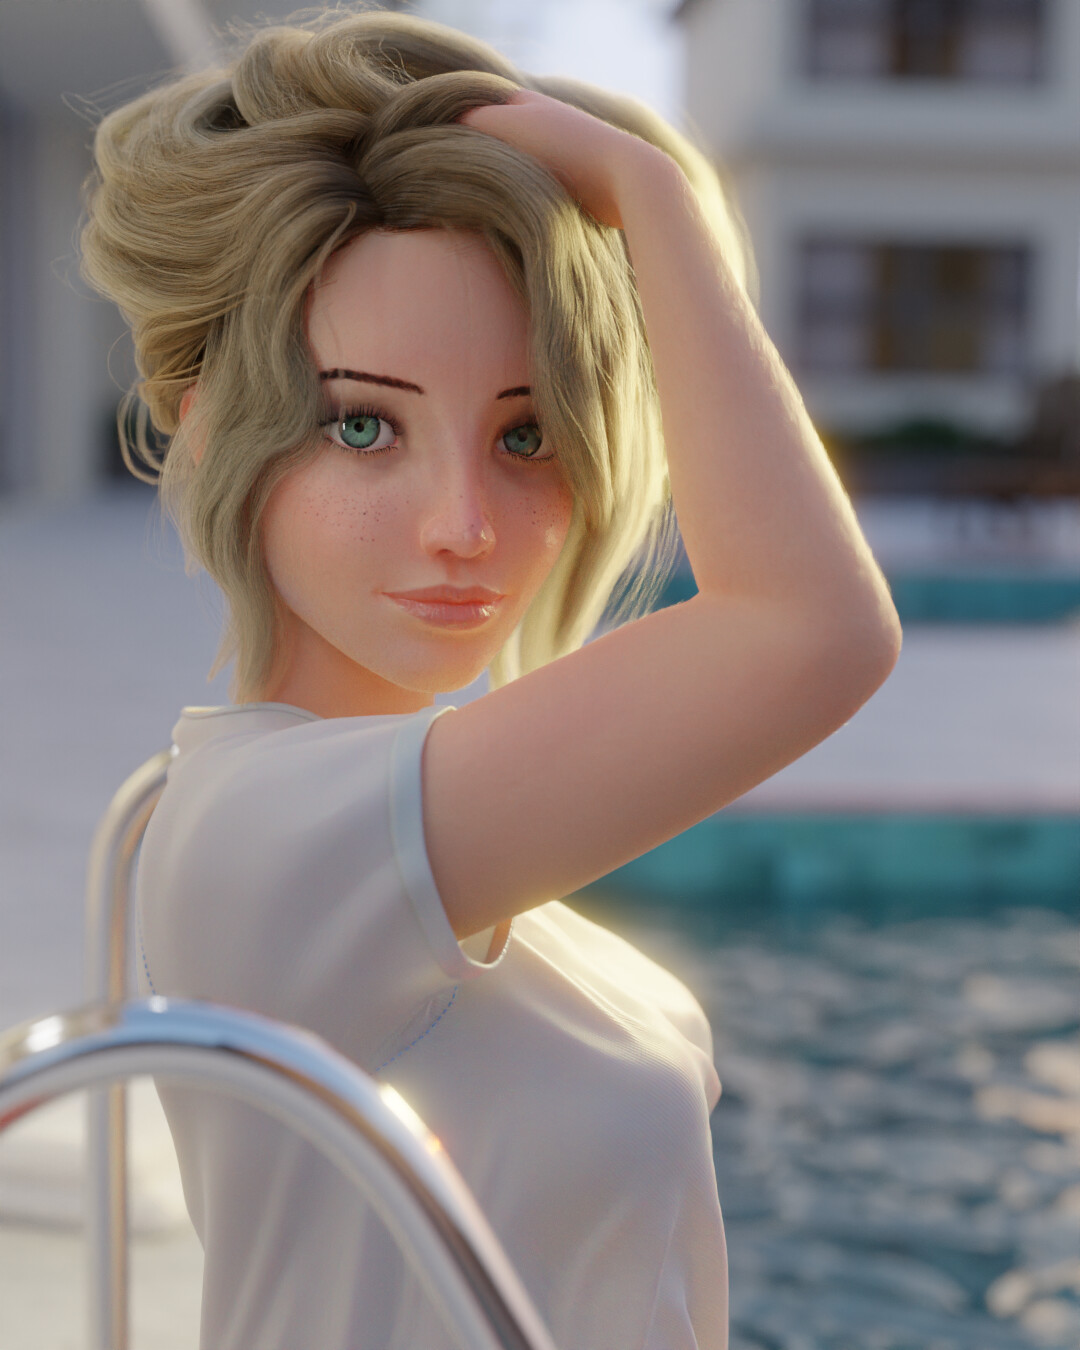 Amazing 3d Render Porn Blonde - Blondie at the pool - Finished Projects - Blender Artists Community